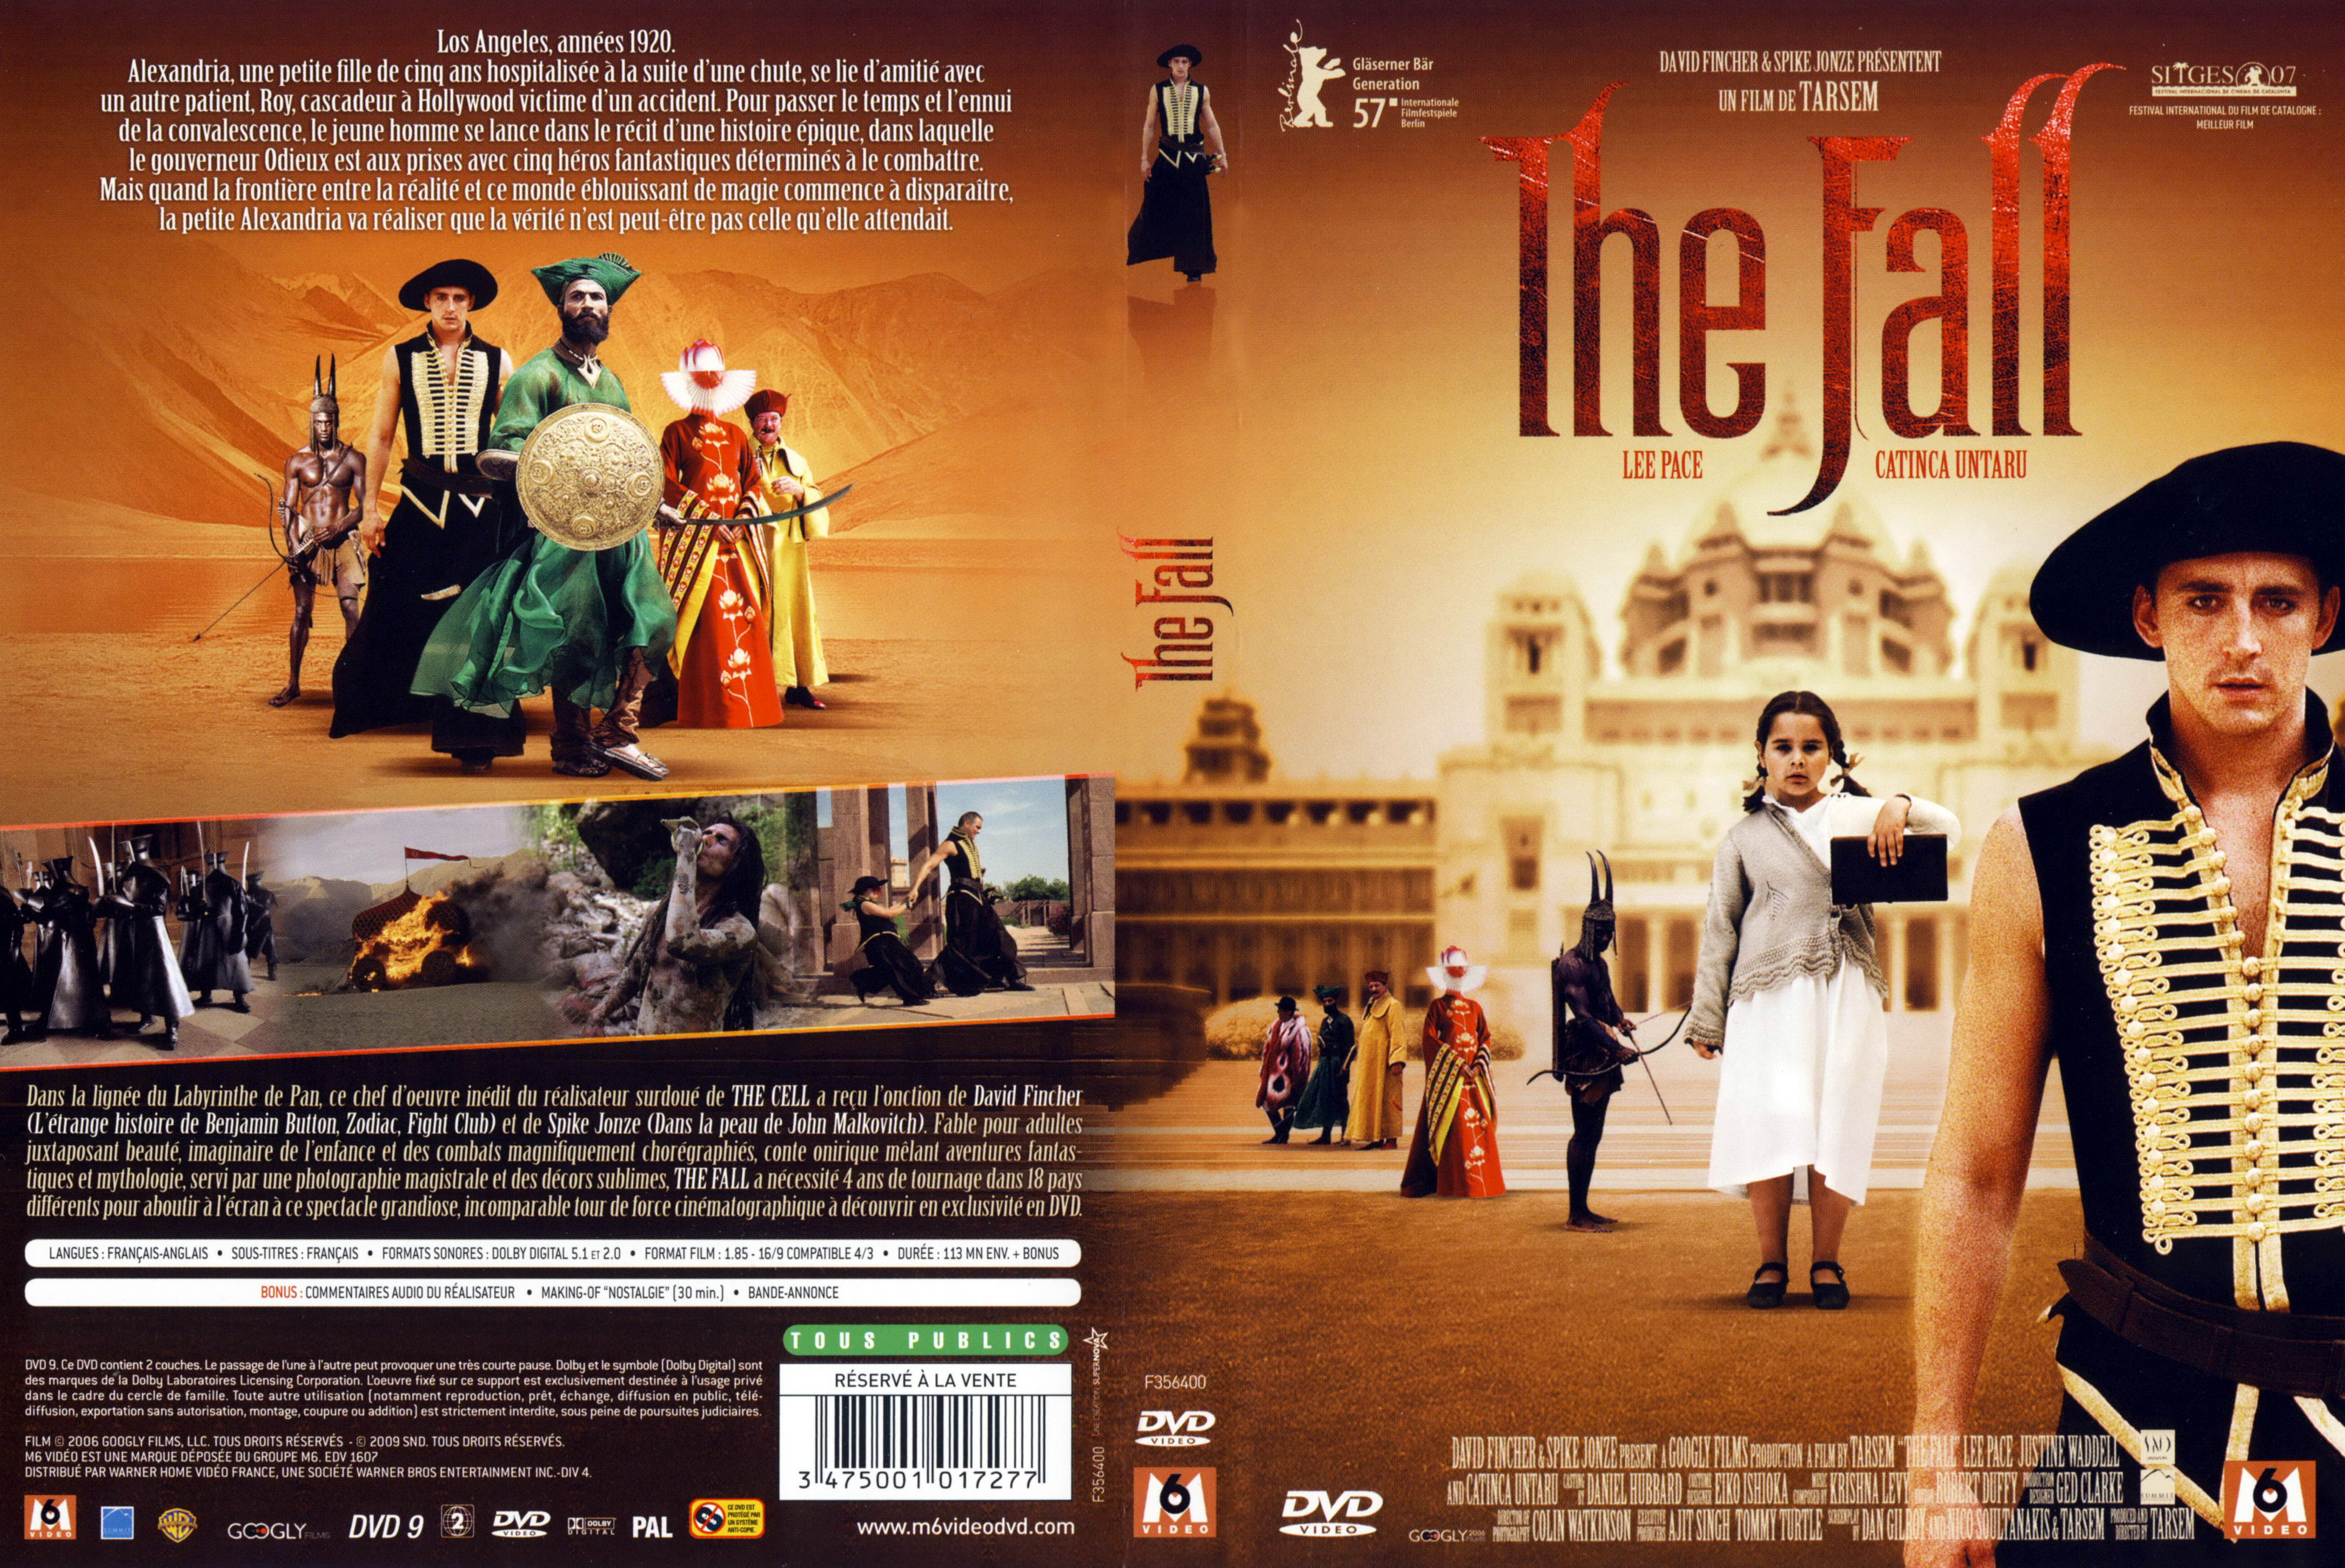 Jaquette DVD The fall